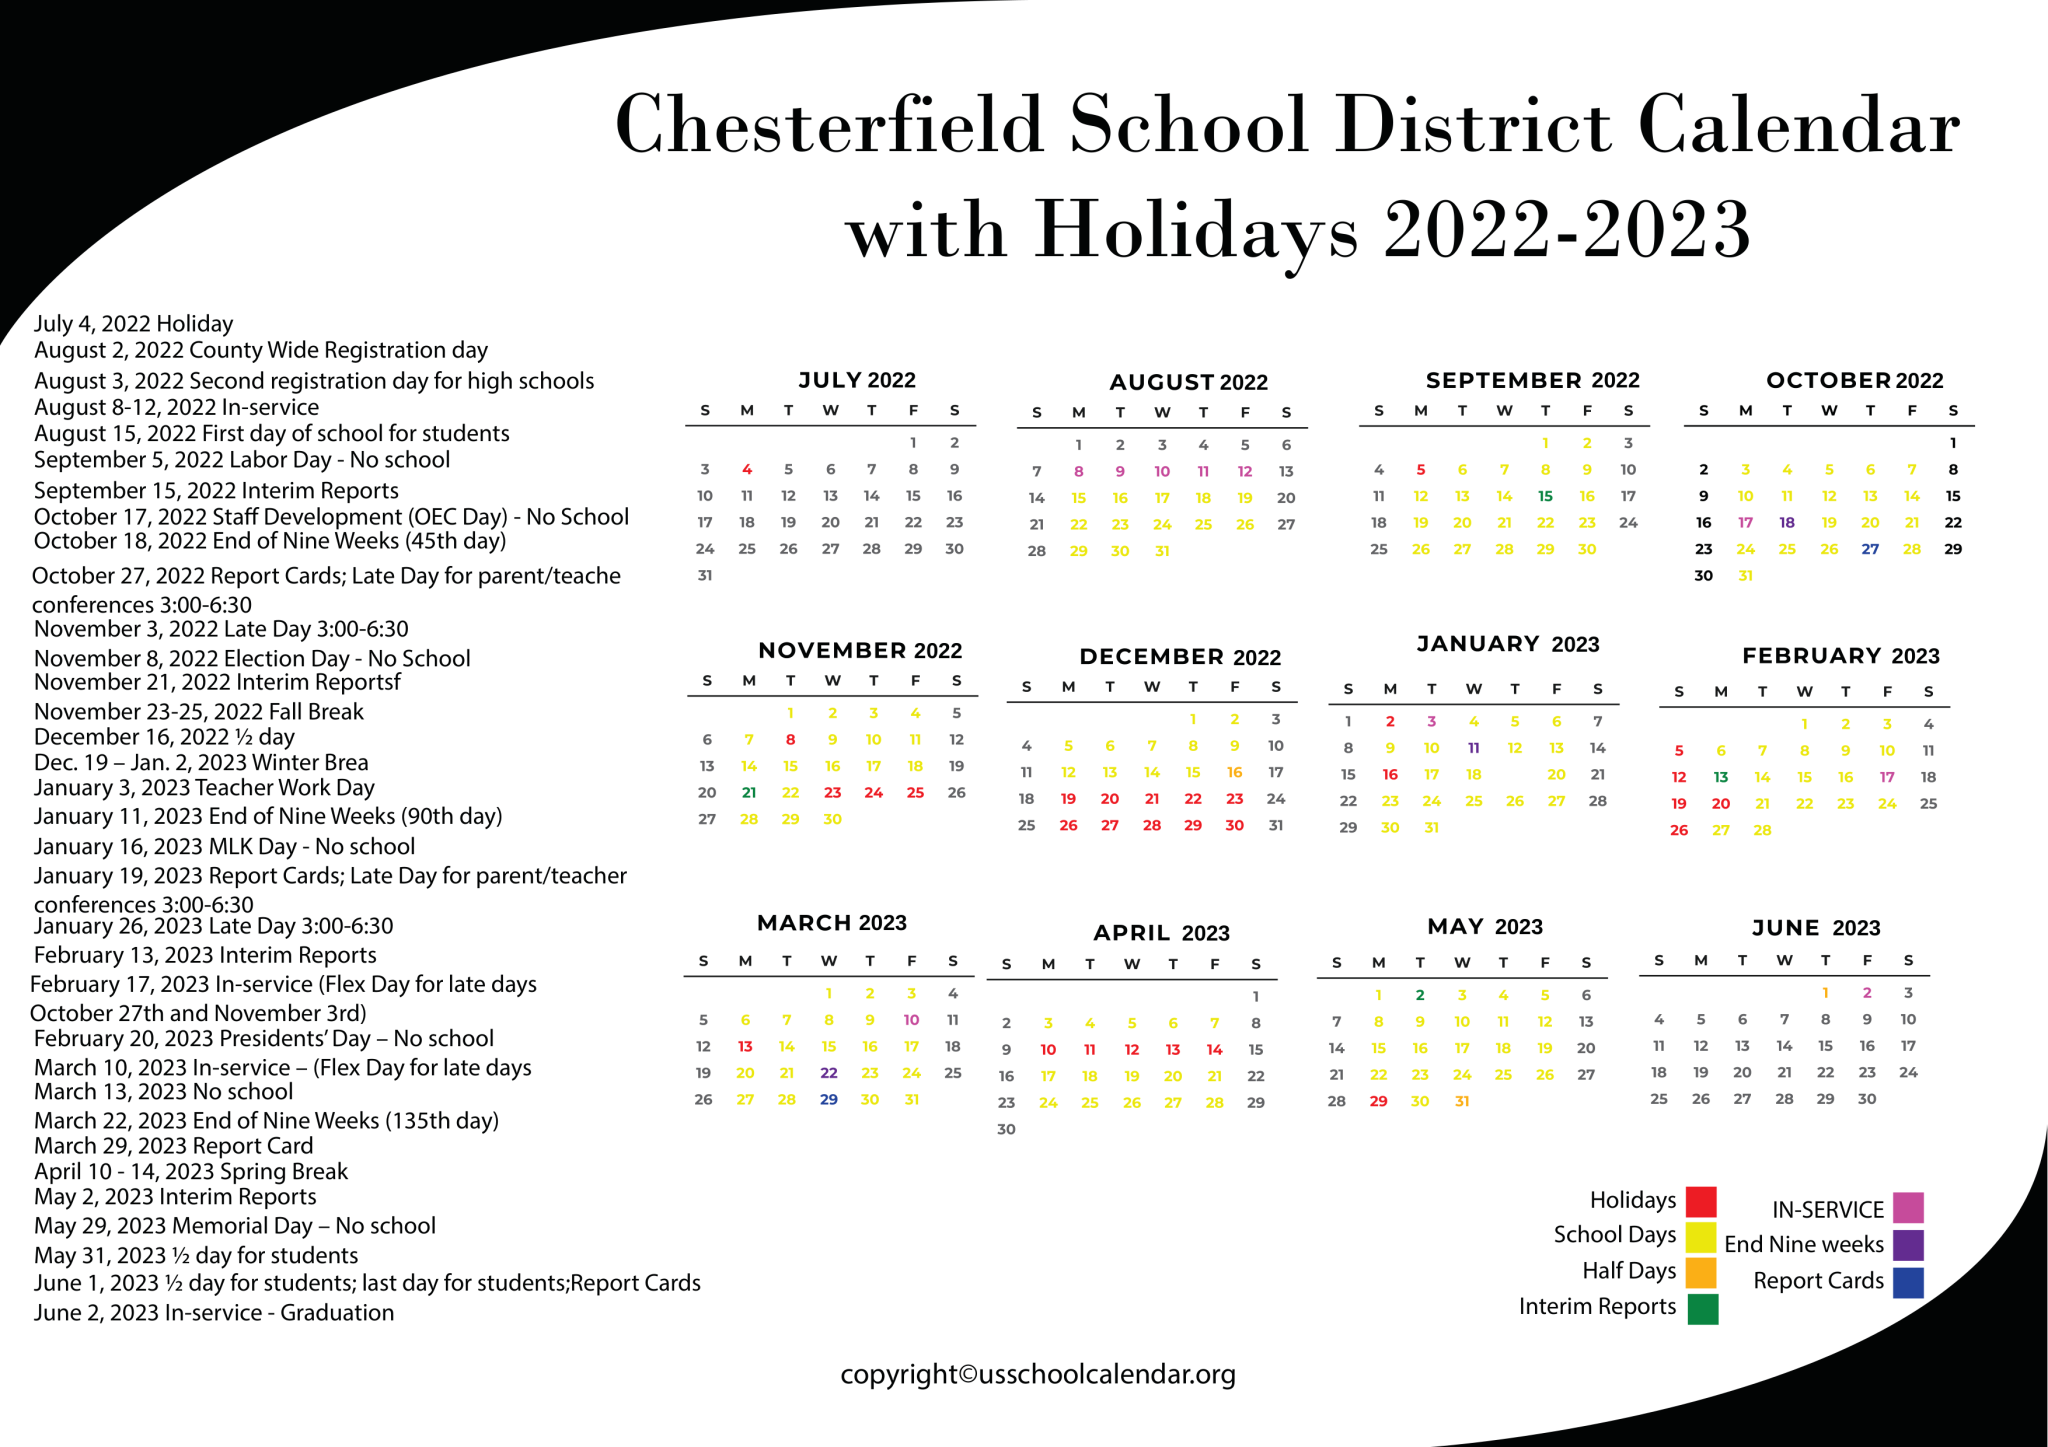 Chesterfield School District Calendar with Holidays 2023